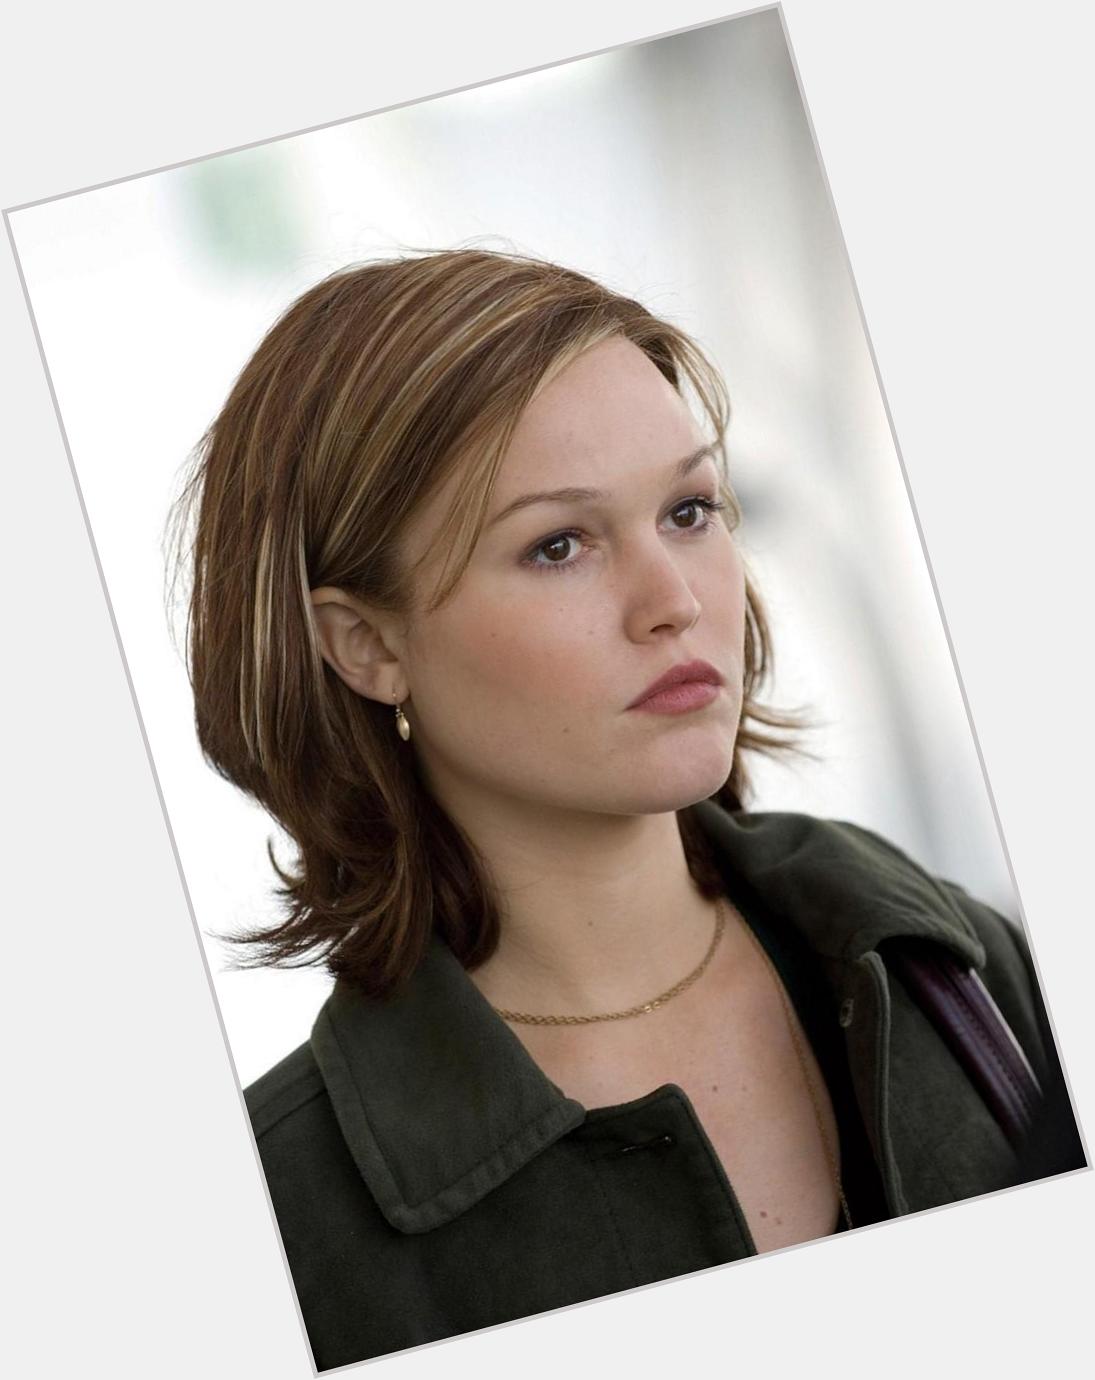 Happy birthday to the gifted and gorgeous Julia Stiles. She turns 34 today. Where have the years gone? 